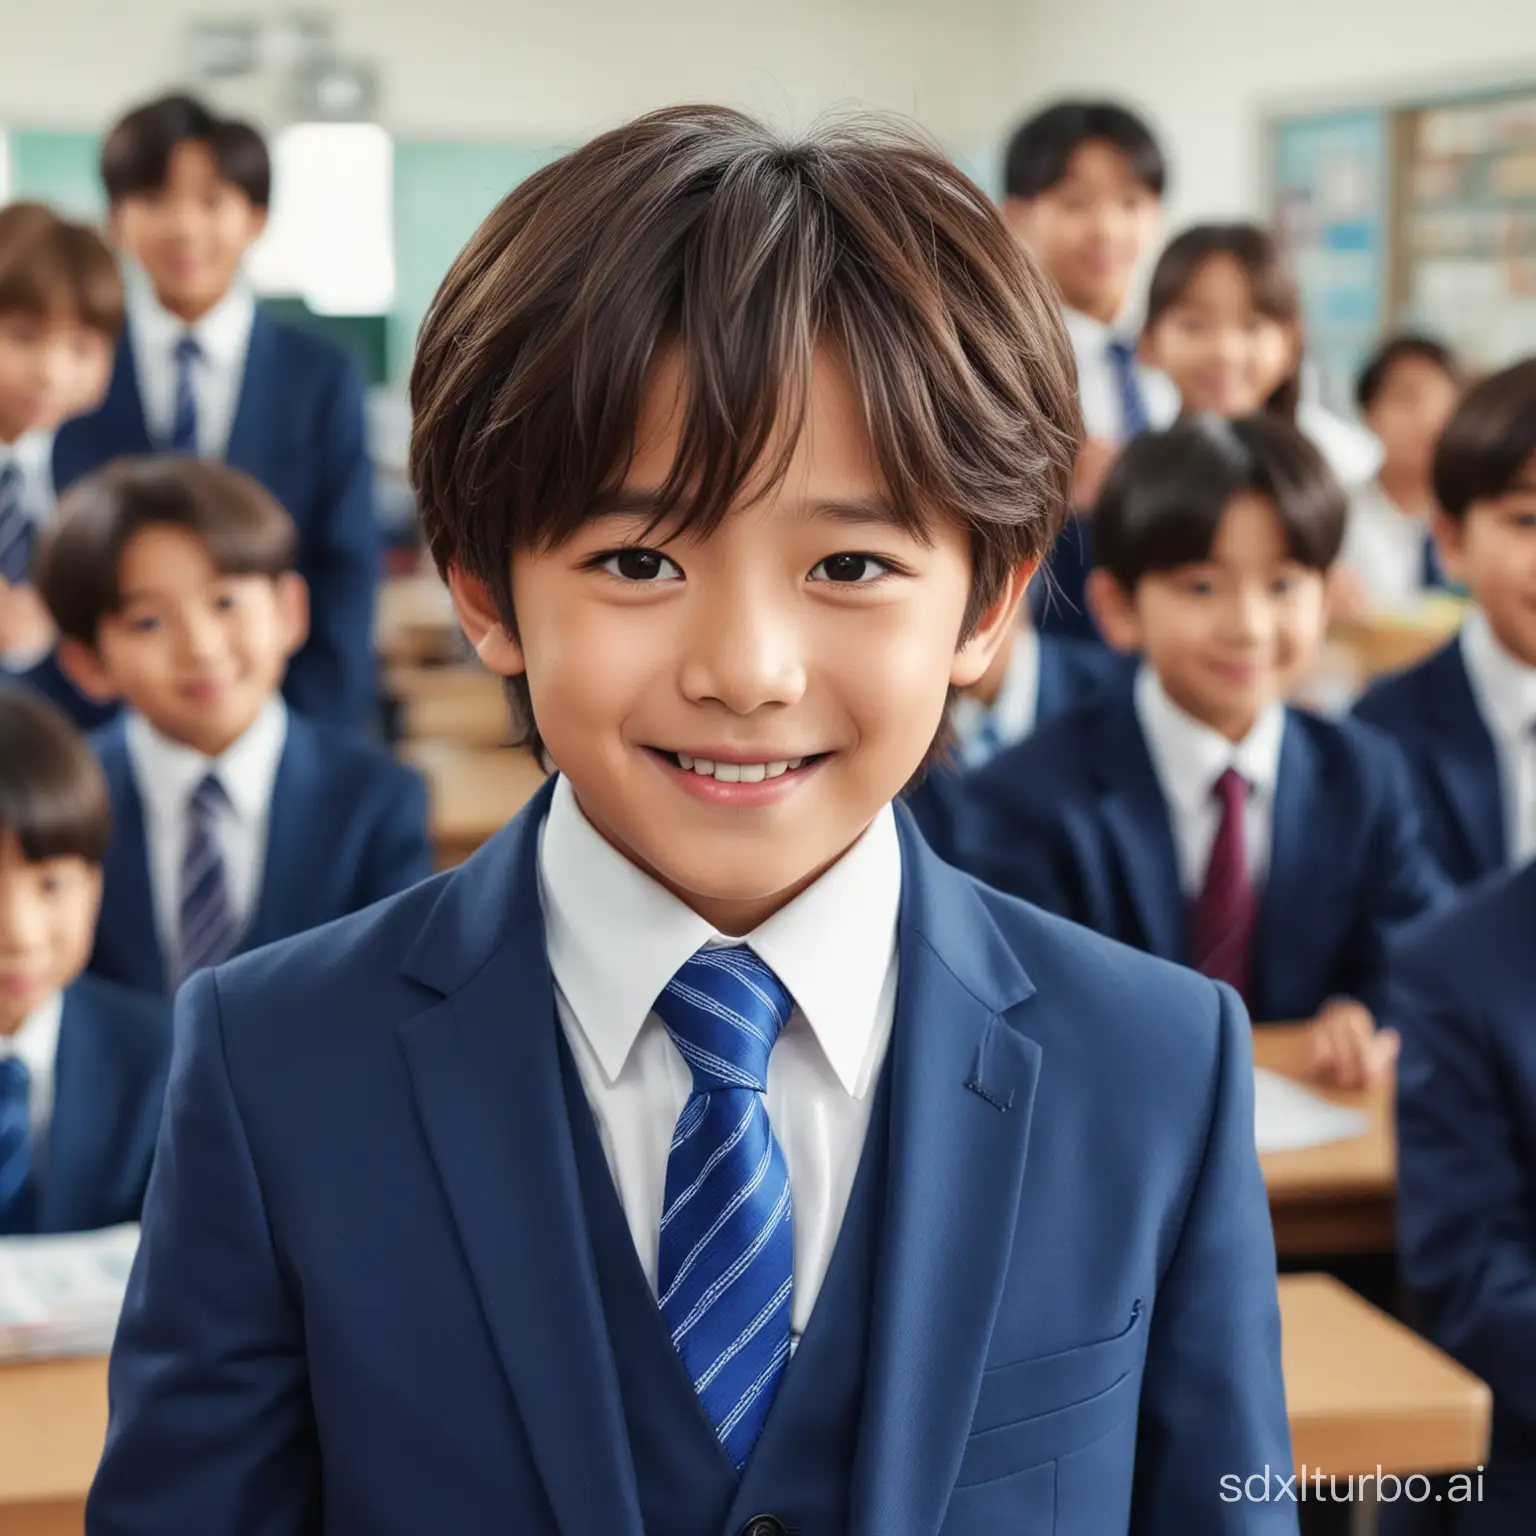 7 YEARS OLD BOY WITH BTS JIN face, BEAUTIFUL HAIR STYLE WITH BLUE SUIT AND TIE, center of frame, smile, smart, whole head, both sides shoulders, suit are in the frame, collecting money from classmates, he walking in classroom, background with many other classmates